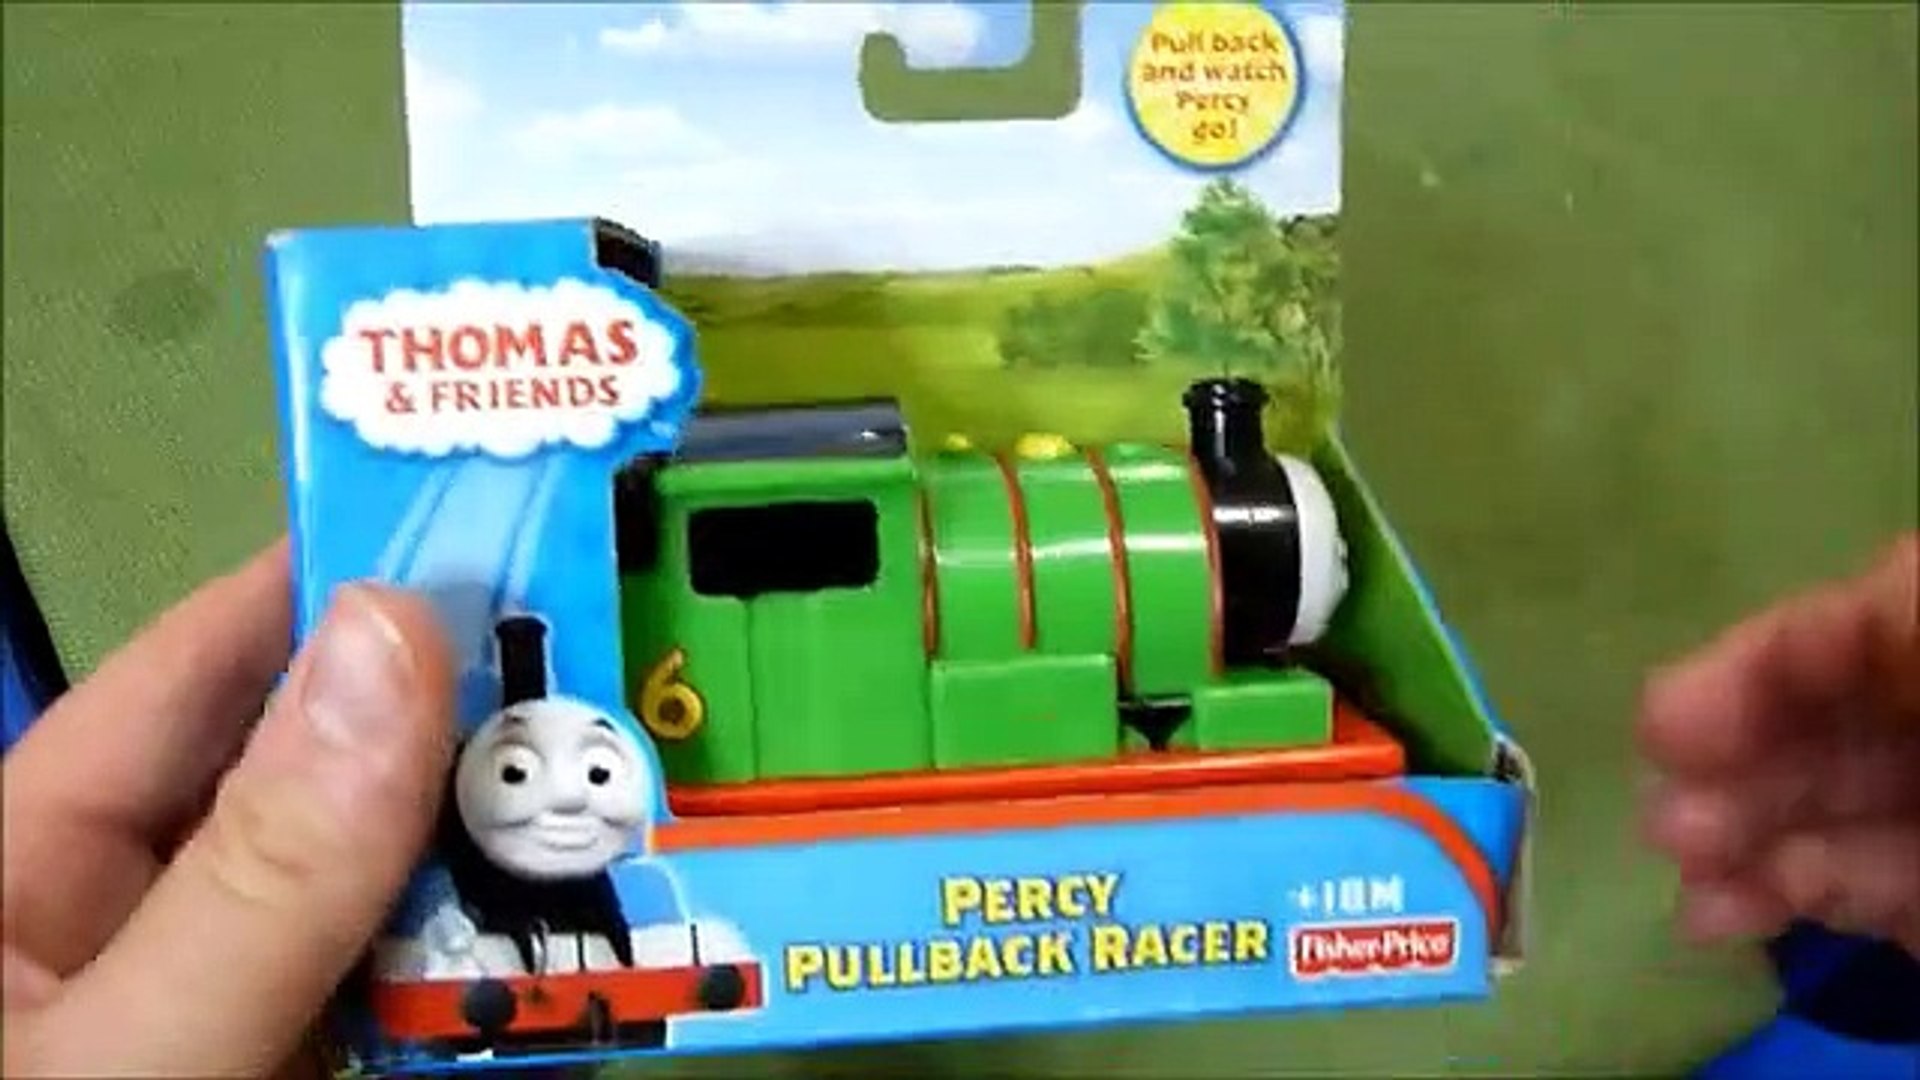 Review: Thomas and Friends Percy the Train Pullback Racer by Fisher Price